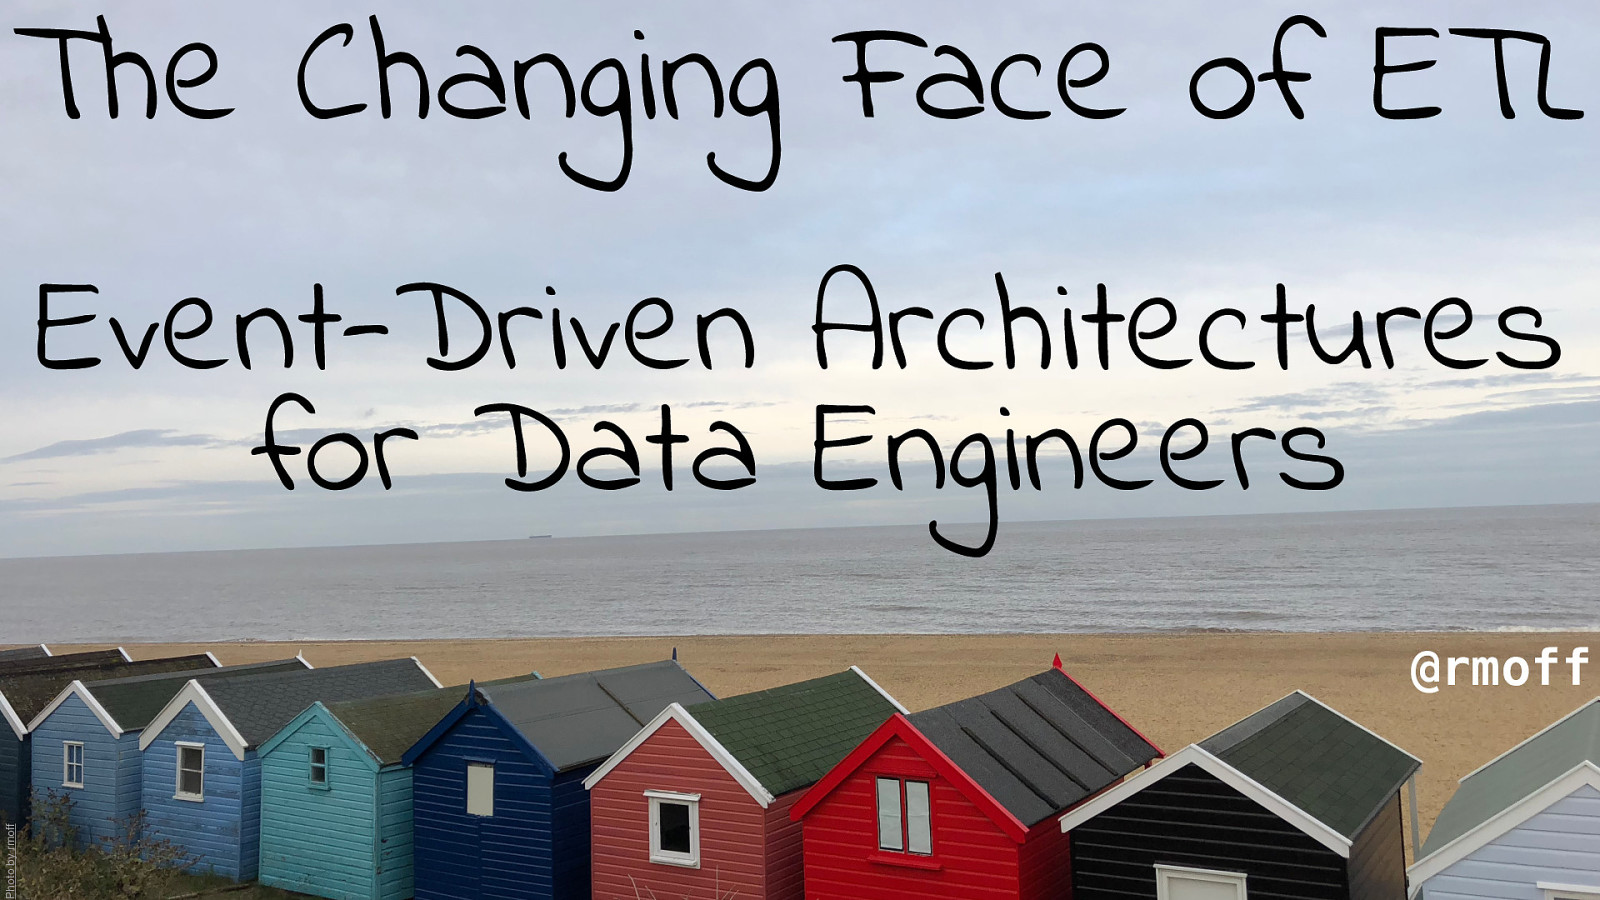 The Changing Face of ETL: Event-Driven Architectures for Data Engineers